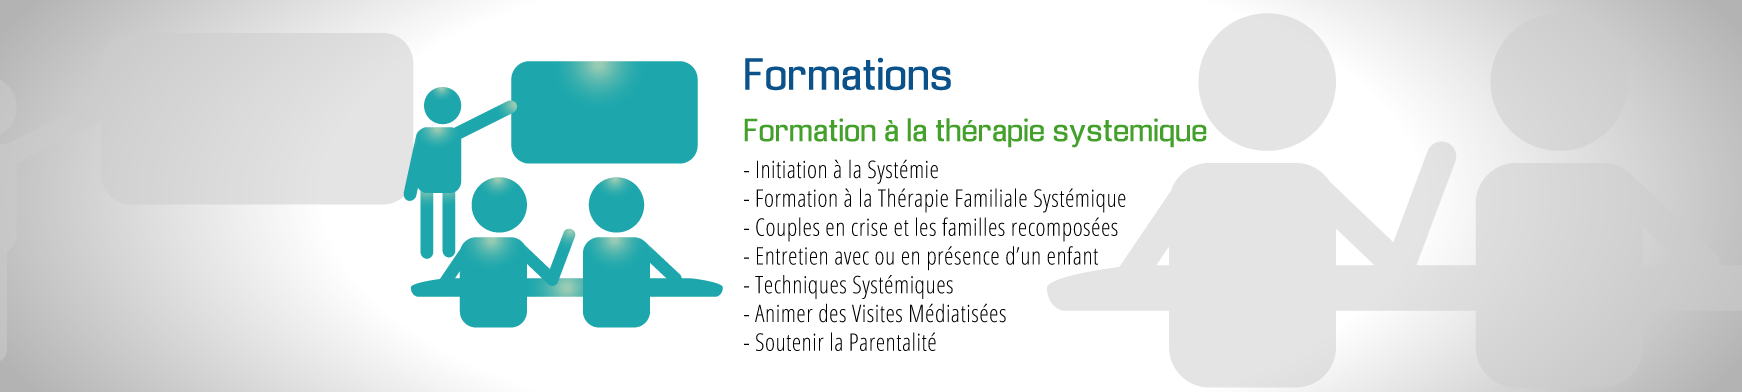 formation a la therapie systemeque